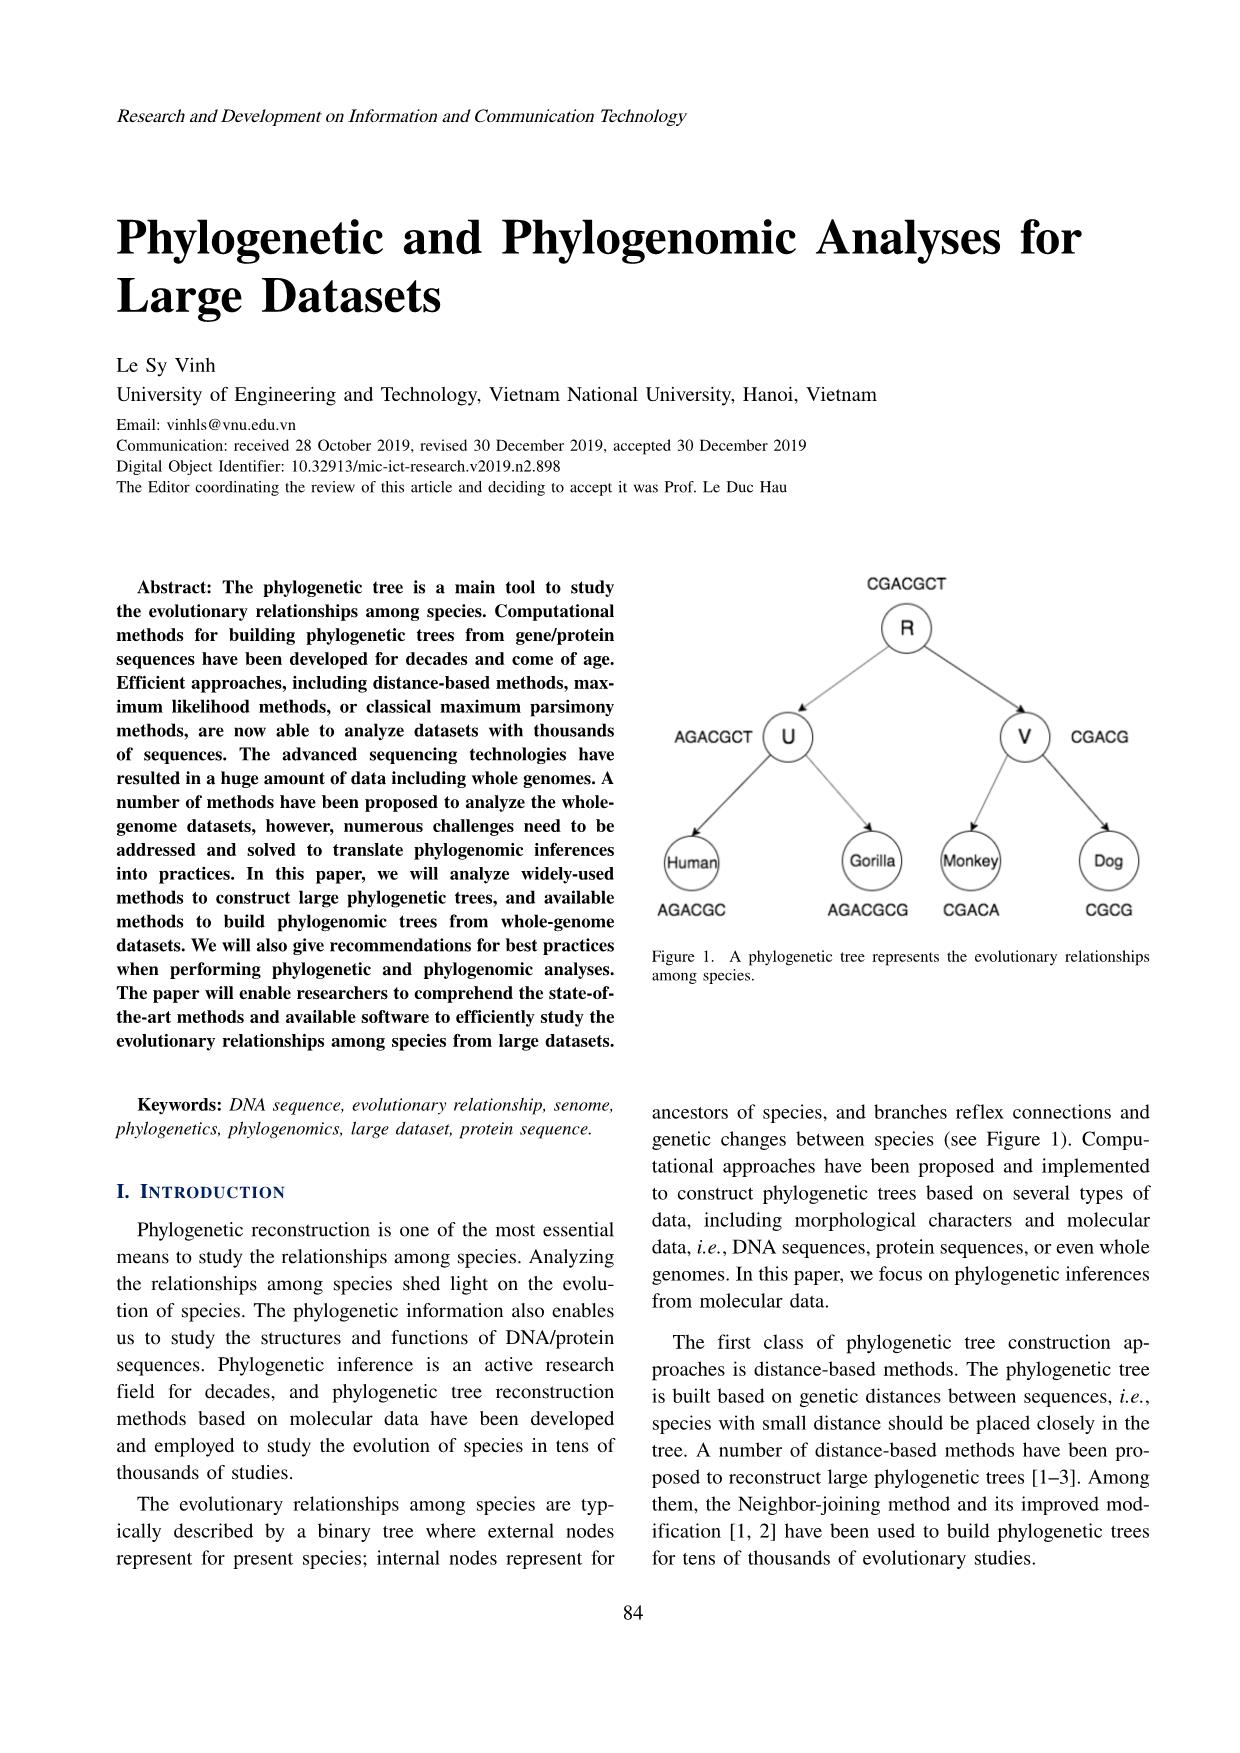 Phylogenetic and phylogenomic analyses for large datasets trang 1